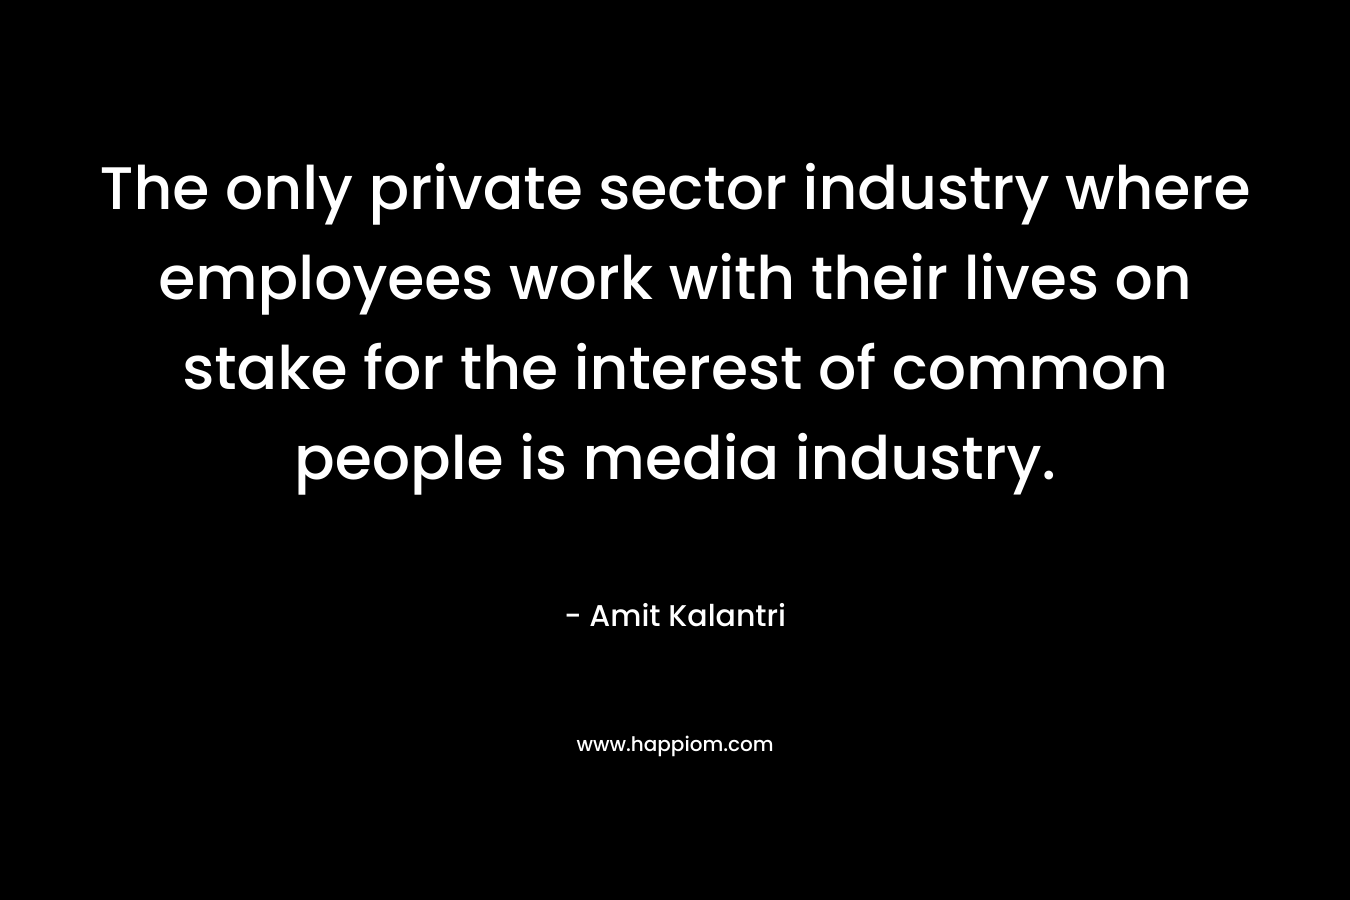 The only private sector industry where employees work with their lives on stake for the interest of common people is media industry. – Amit Kalantri